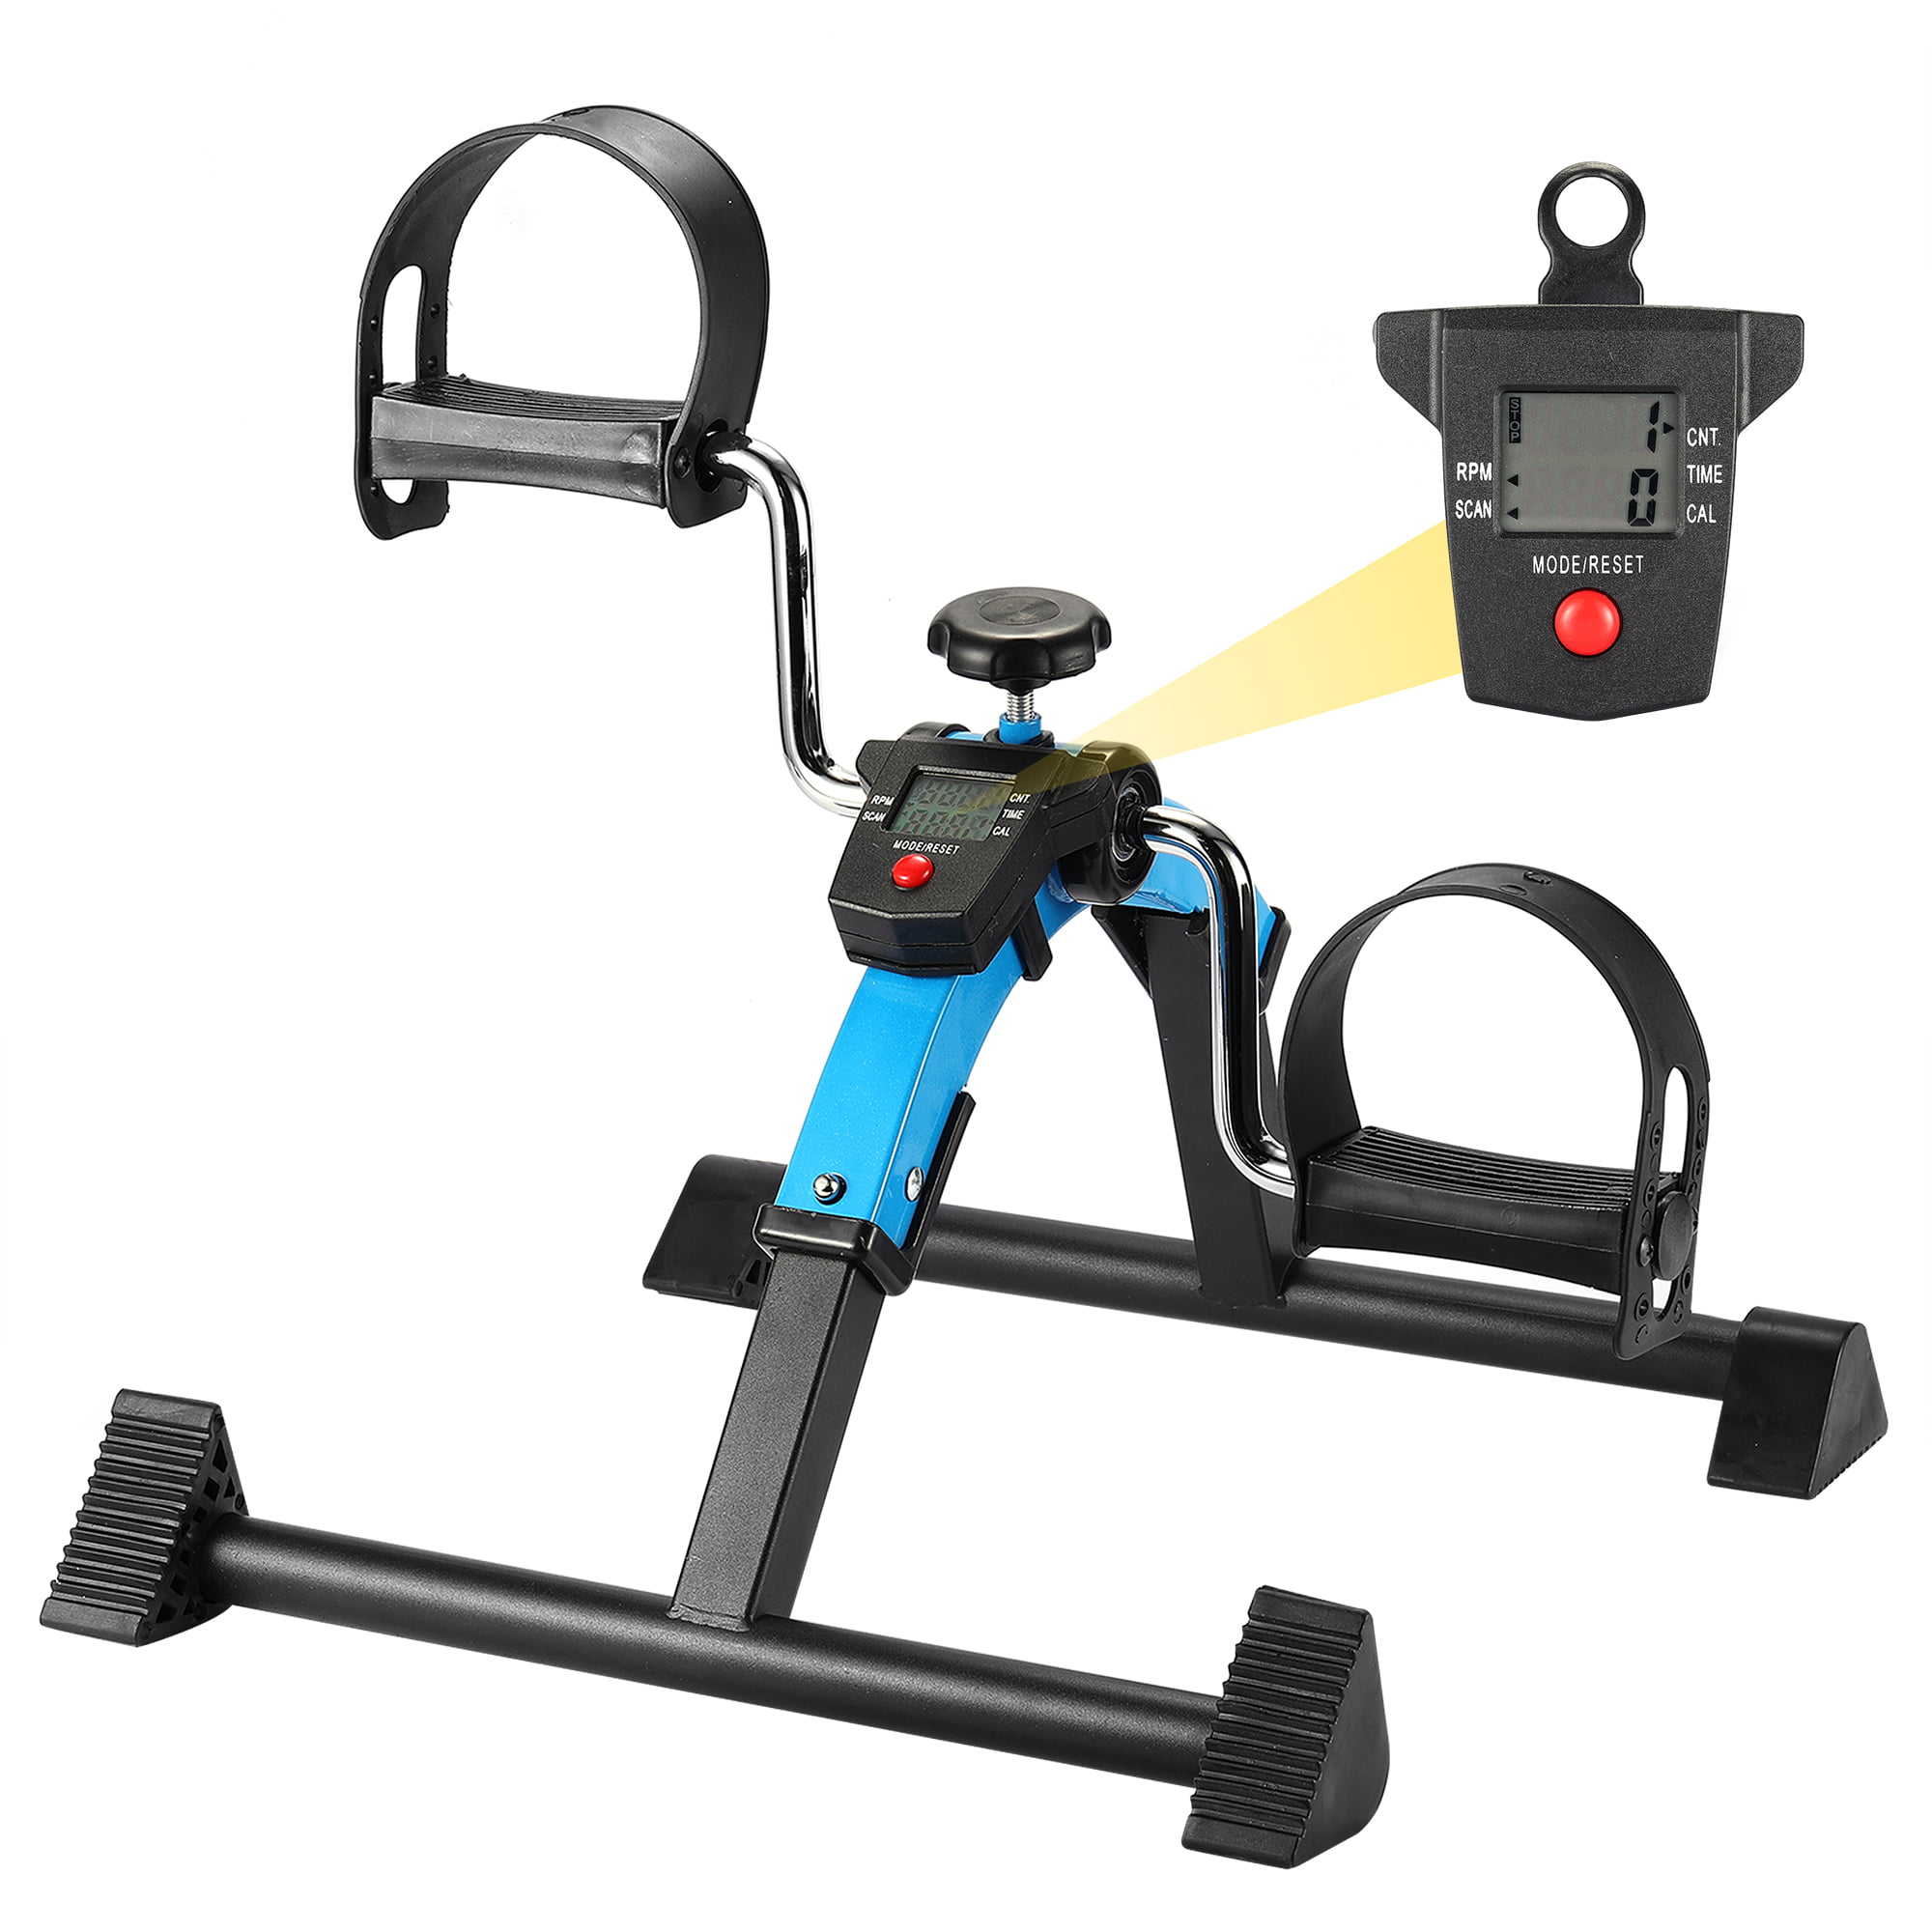 Pedal Exerciser Desk Exercise Bike for Leg and Arm Exercise Home Workout Gear 